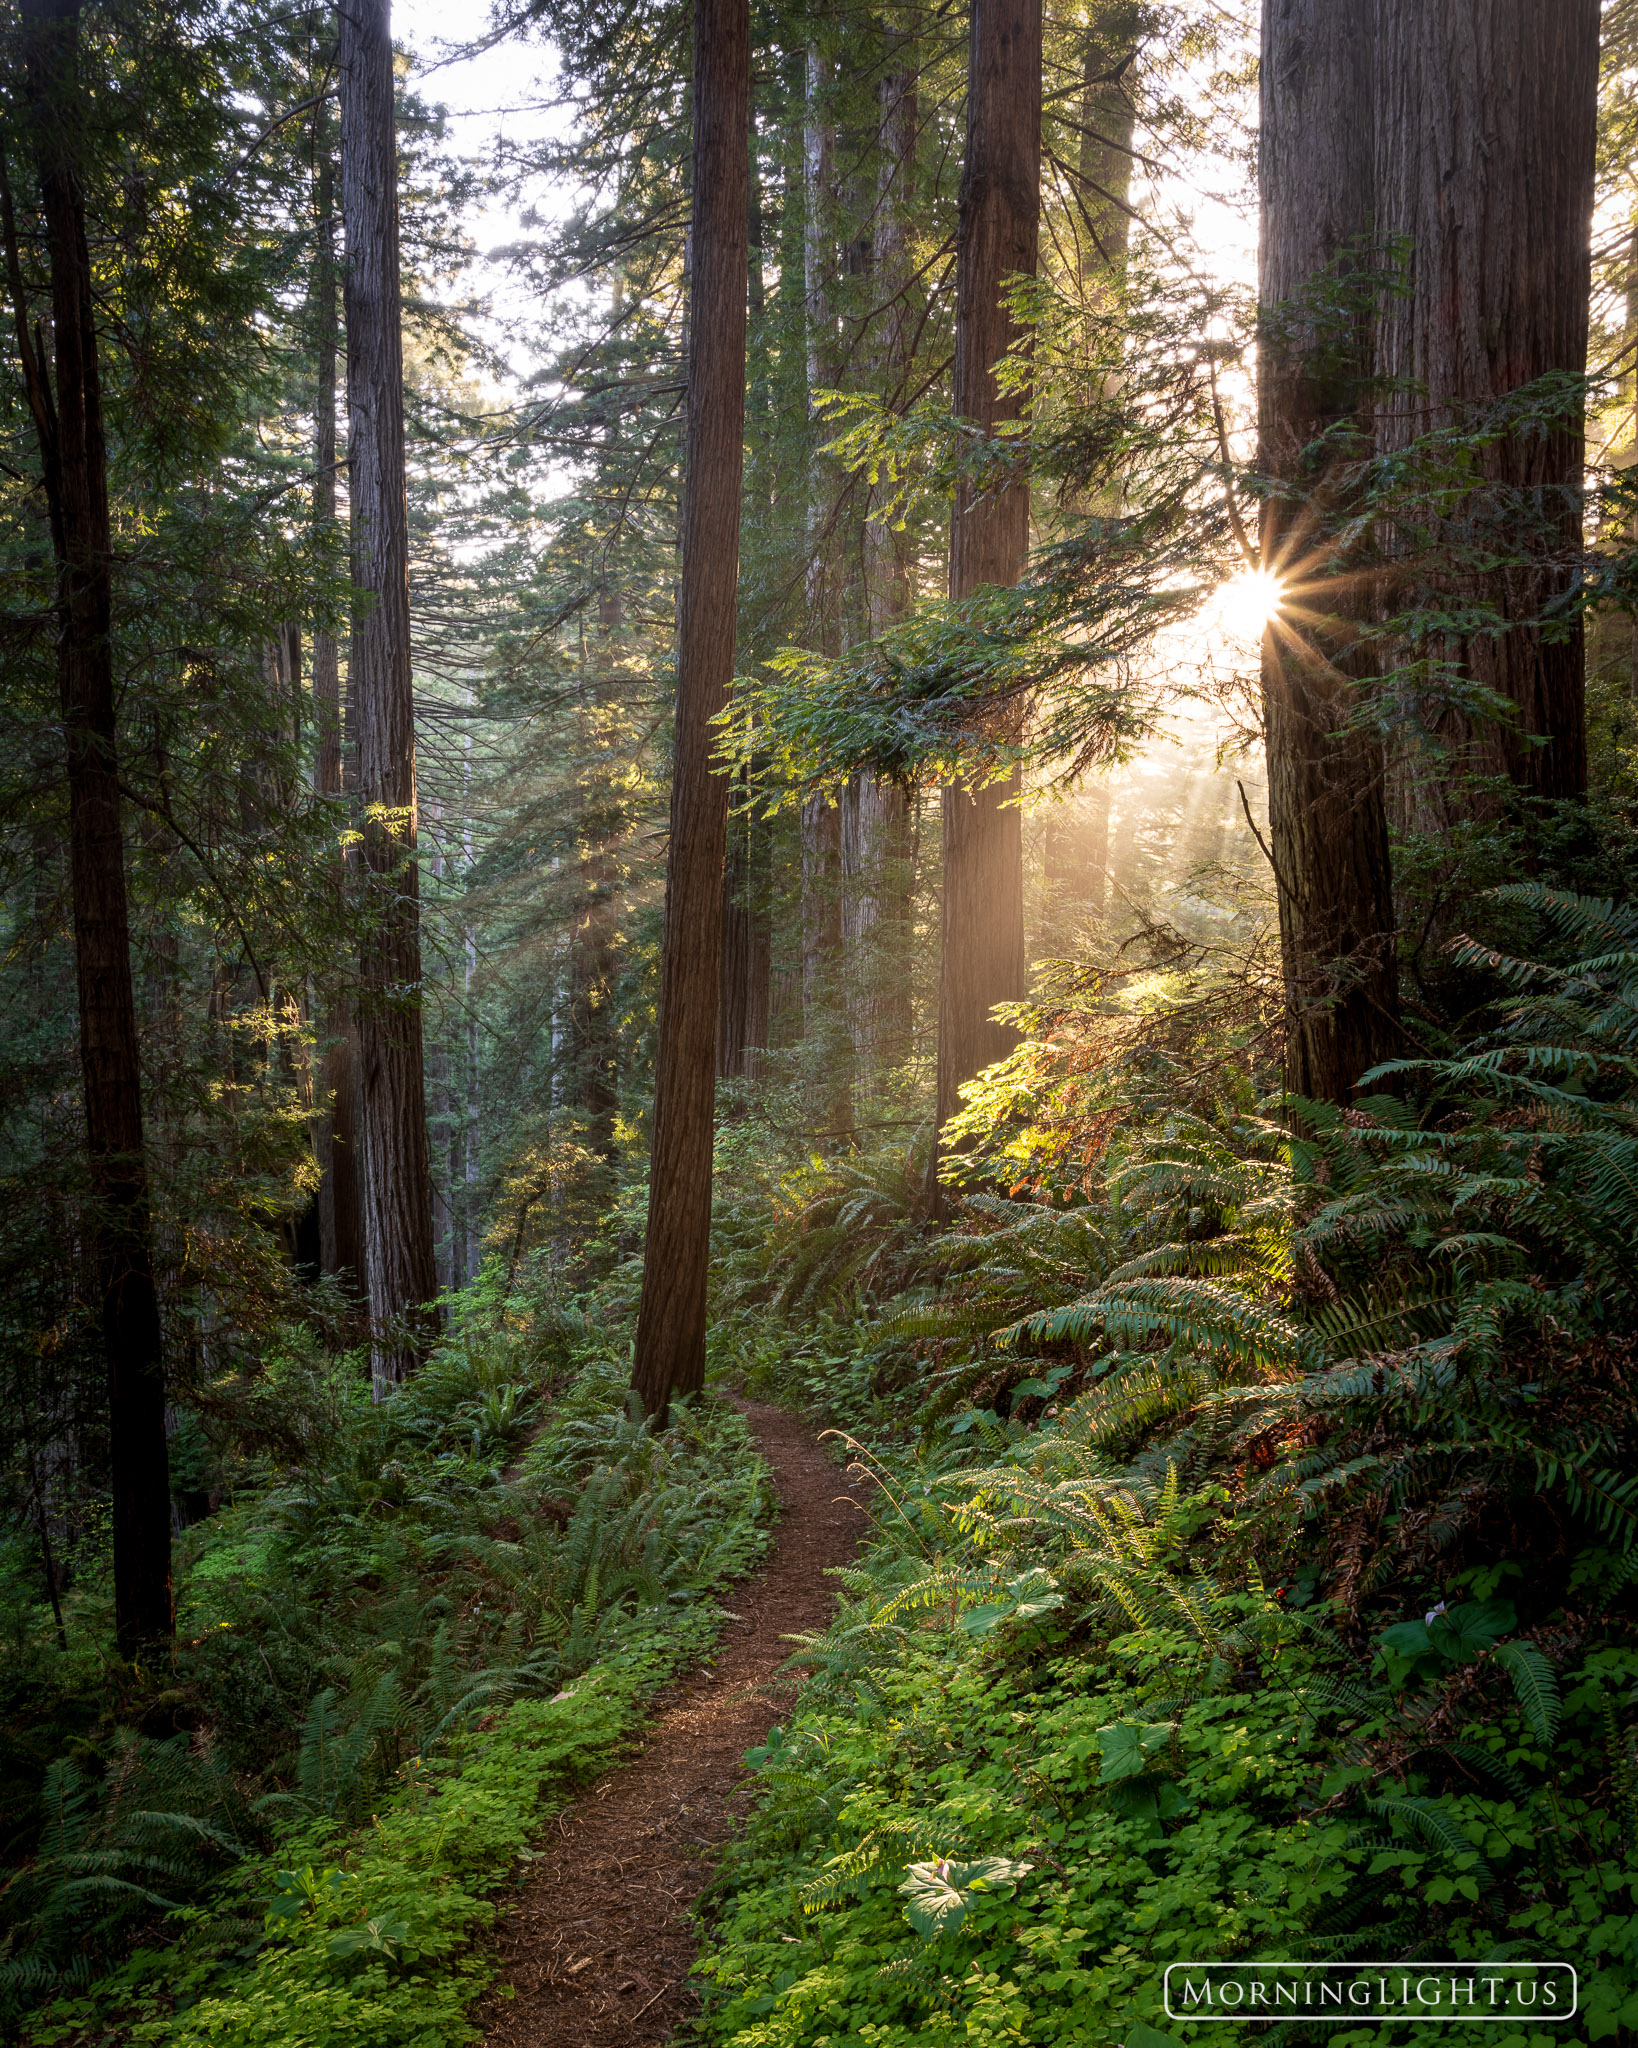 Winding through the redwood forest early in the morning as the sun's first rays arrive to greet you is a feeling that's hard...